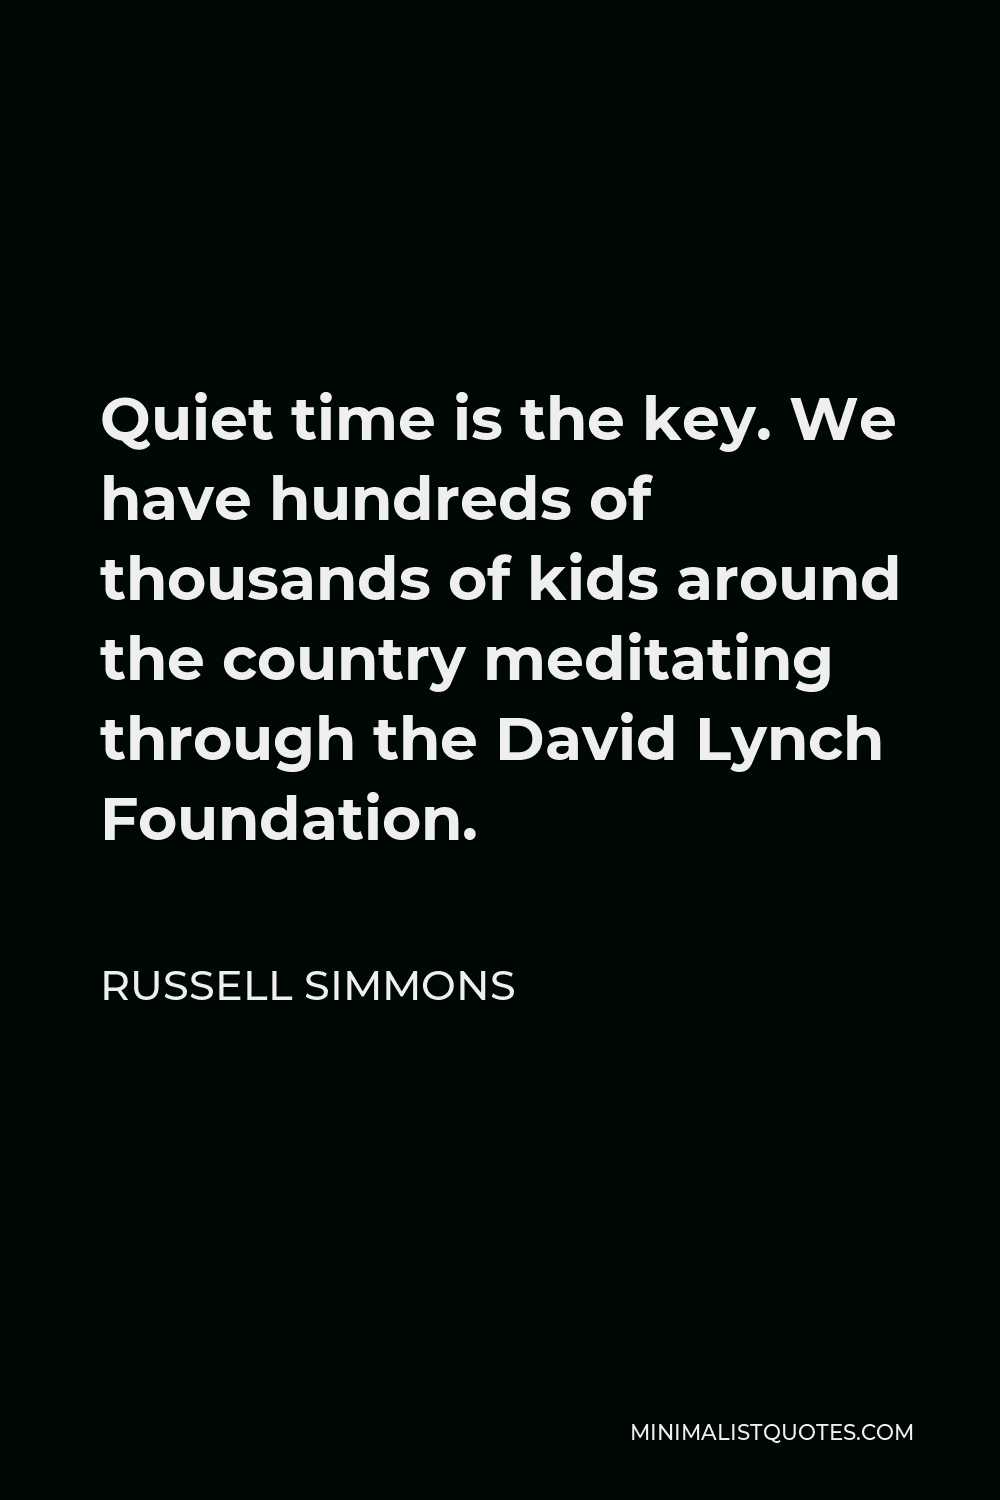 Russell Simmons Quote - Quiet time is the key. We have hundreds of thousands of kids around the country meditating through the David Lynch Foundation.